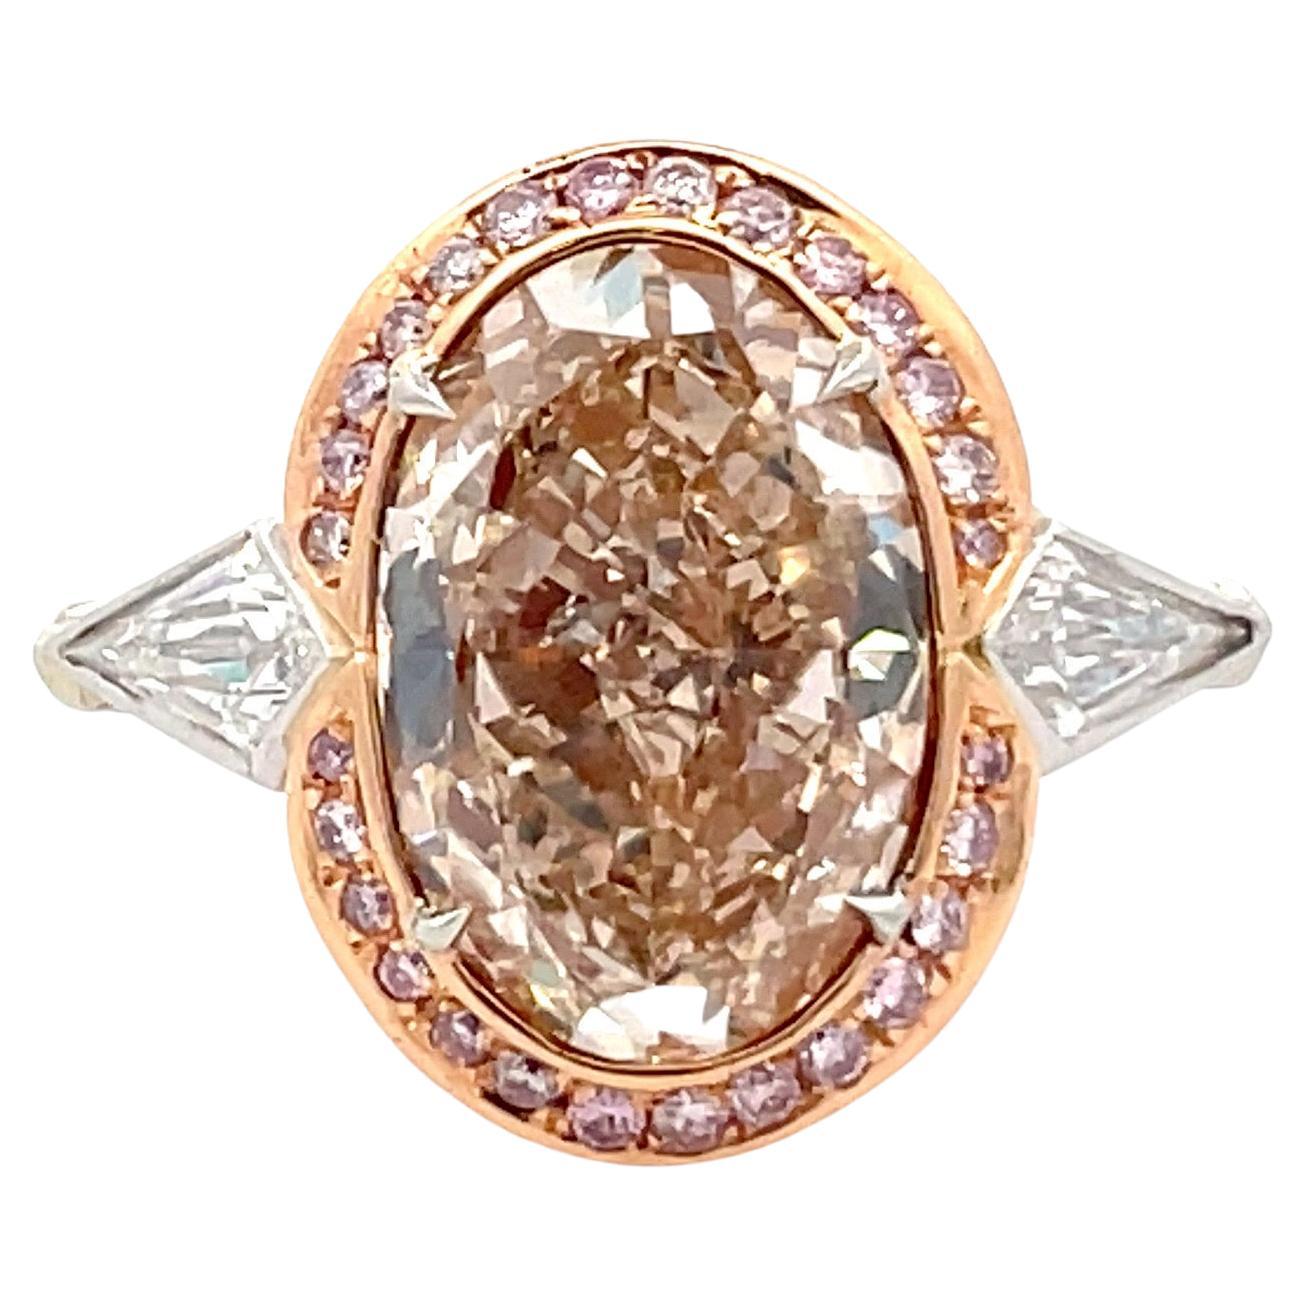 EGL USA Certified Oval Fancy Pinkish Brown Halo Diamond Ring 5.72 CTTW Platinum For Sale